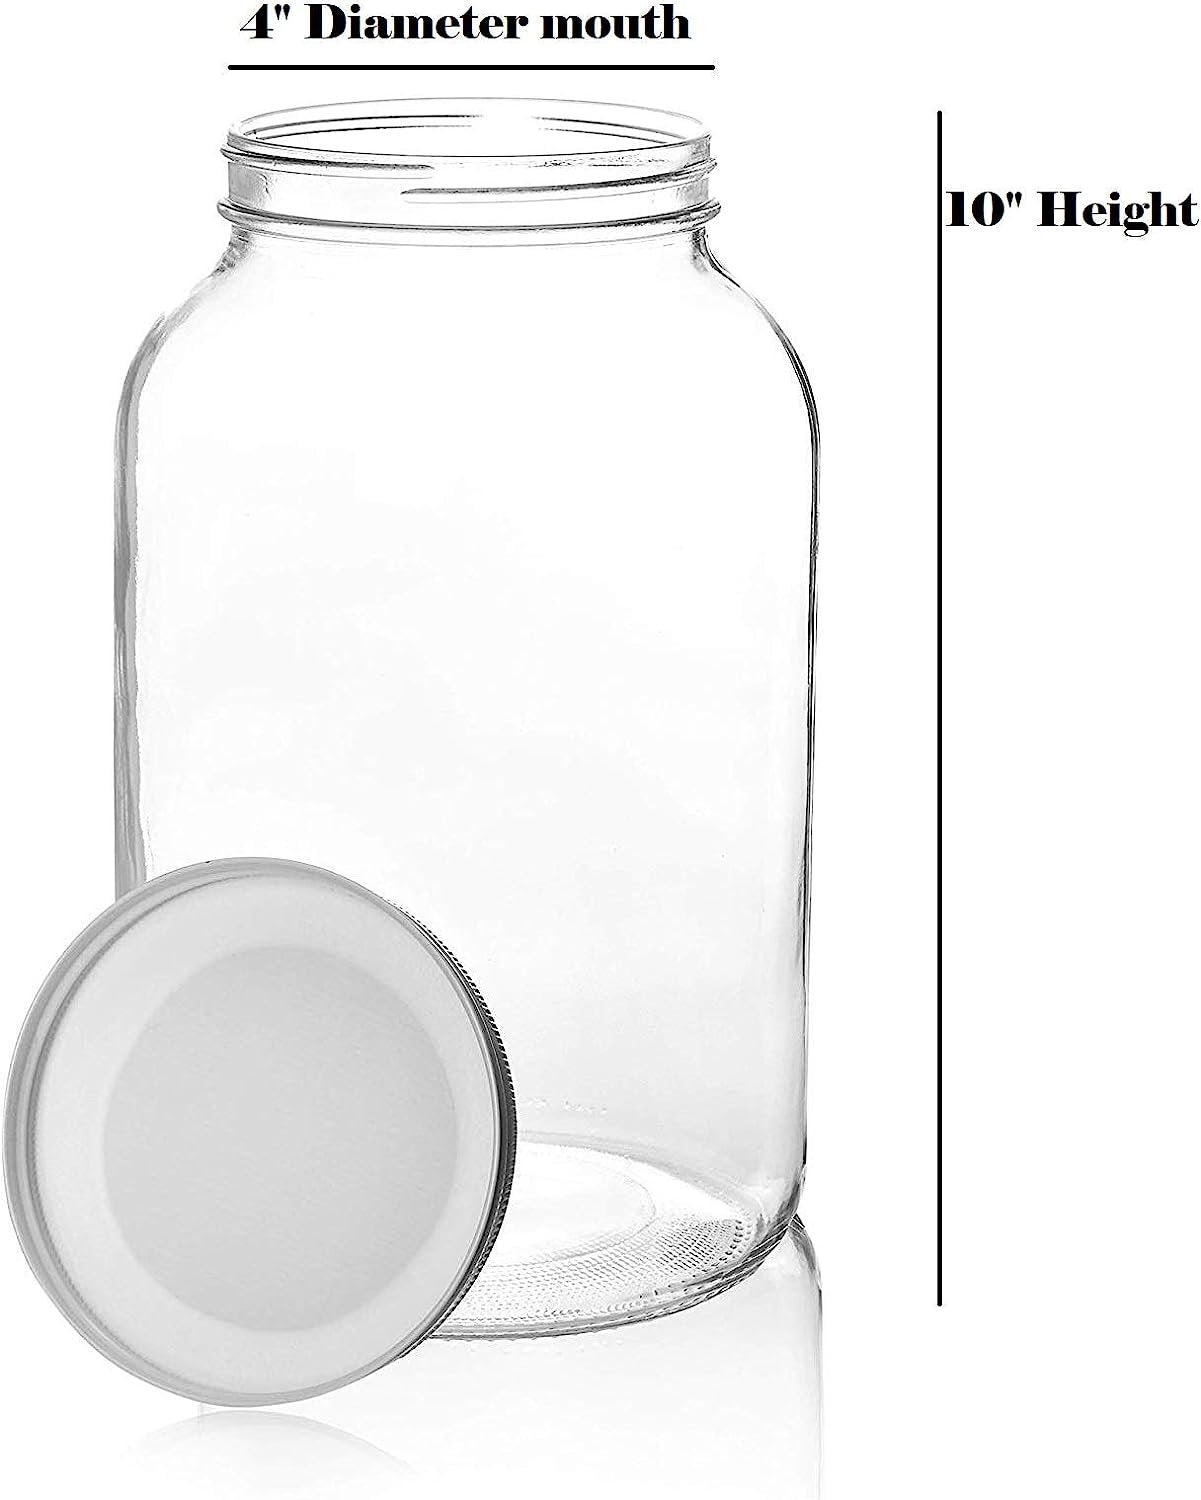 2 Pack - 1 Gallon Glass Mason Jar Wide Mouth with Airtight Metal Lid - Safe for Fermenting Kombucha Kefir - Pickling, Storing and Canning- BPA-Free Dishwasher Safe- Made in USA By Kitchentoolz